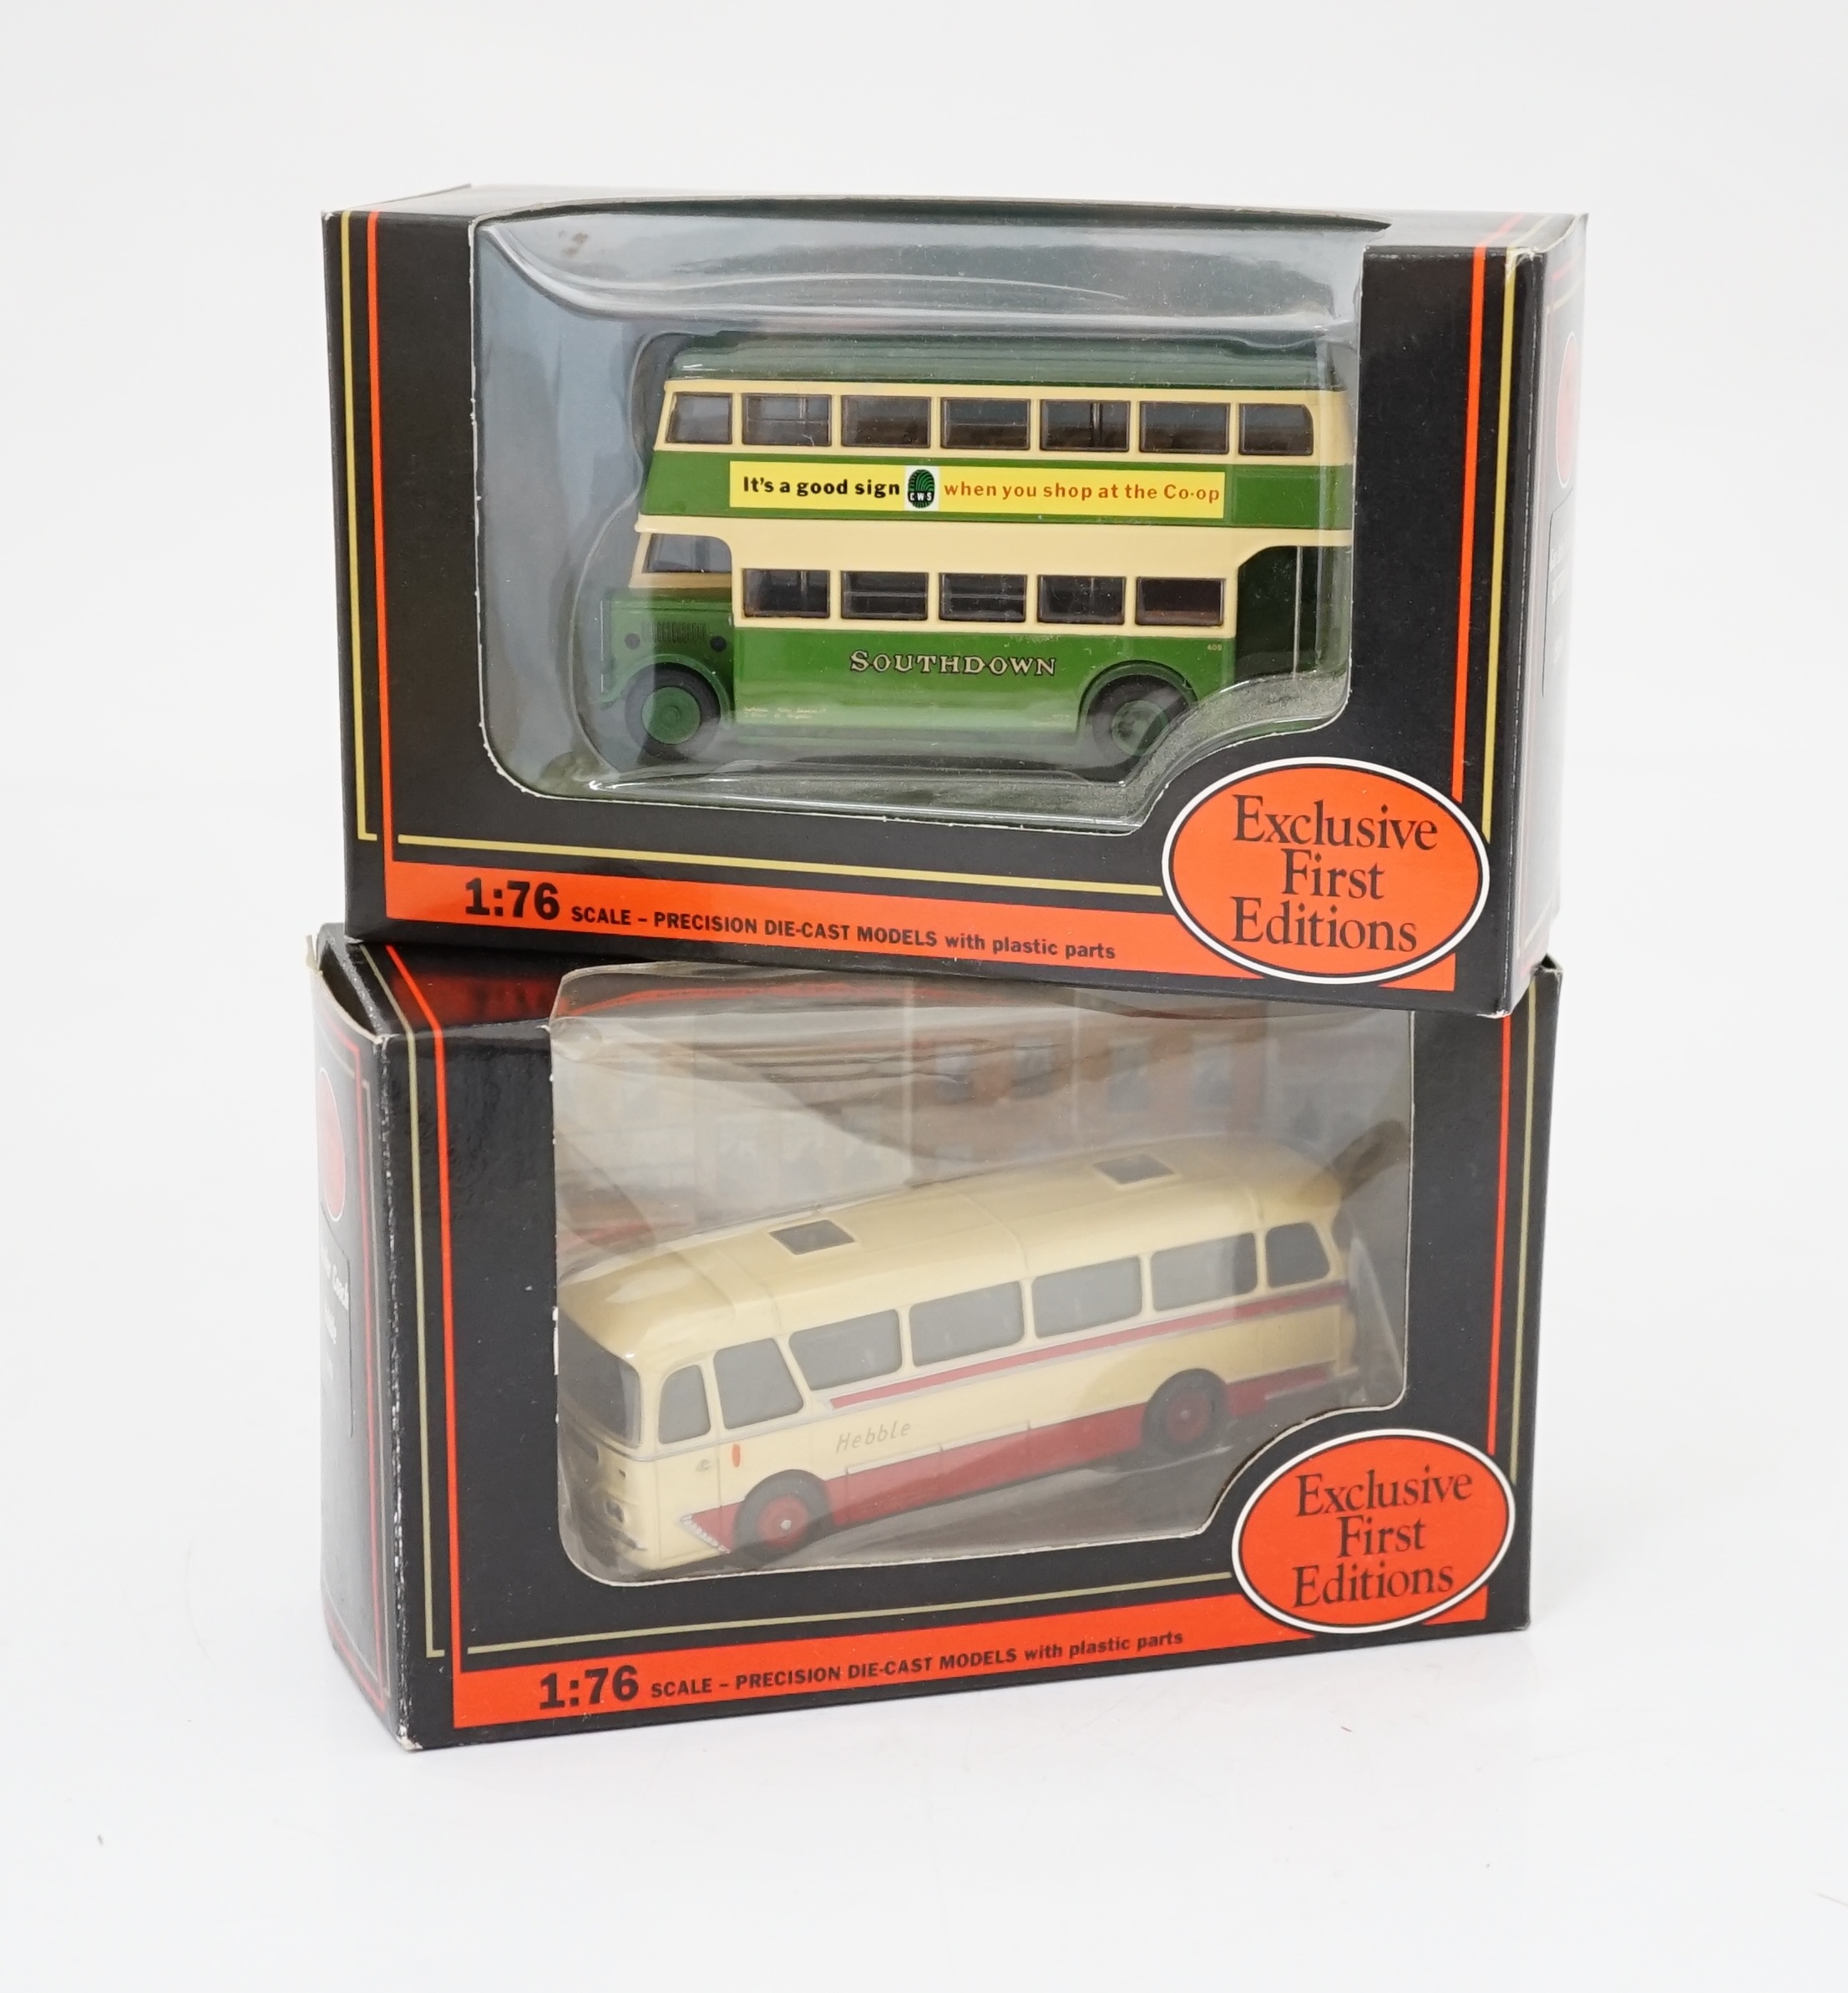 Thirty-five boxed EFE buses and coaches, etc. operators including; East Kent, Grey Cars, Brighton and Hove, Eastbourne, Southdown, etc.